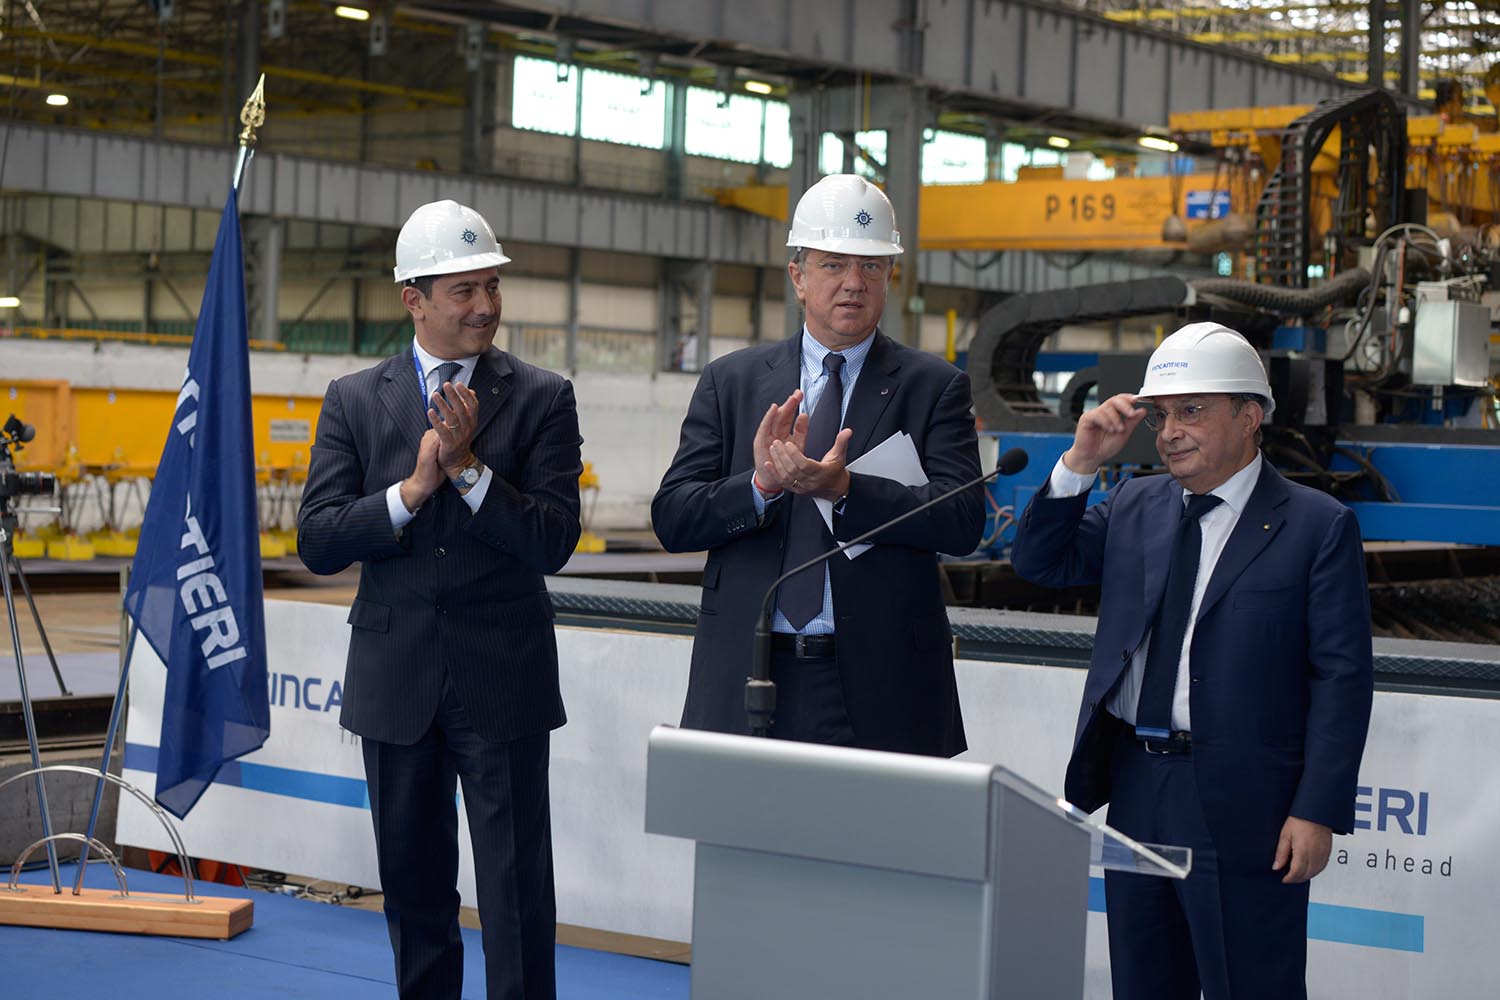 left to right: Gianni Onorato, CEO of MSC Cruises; Pierfrancesco Vago, Executive Chairman of MSC Cruises and Giuseppe Bono, CEO of Fincantieri during the steel-cutting ceremony